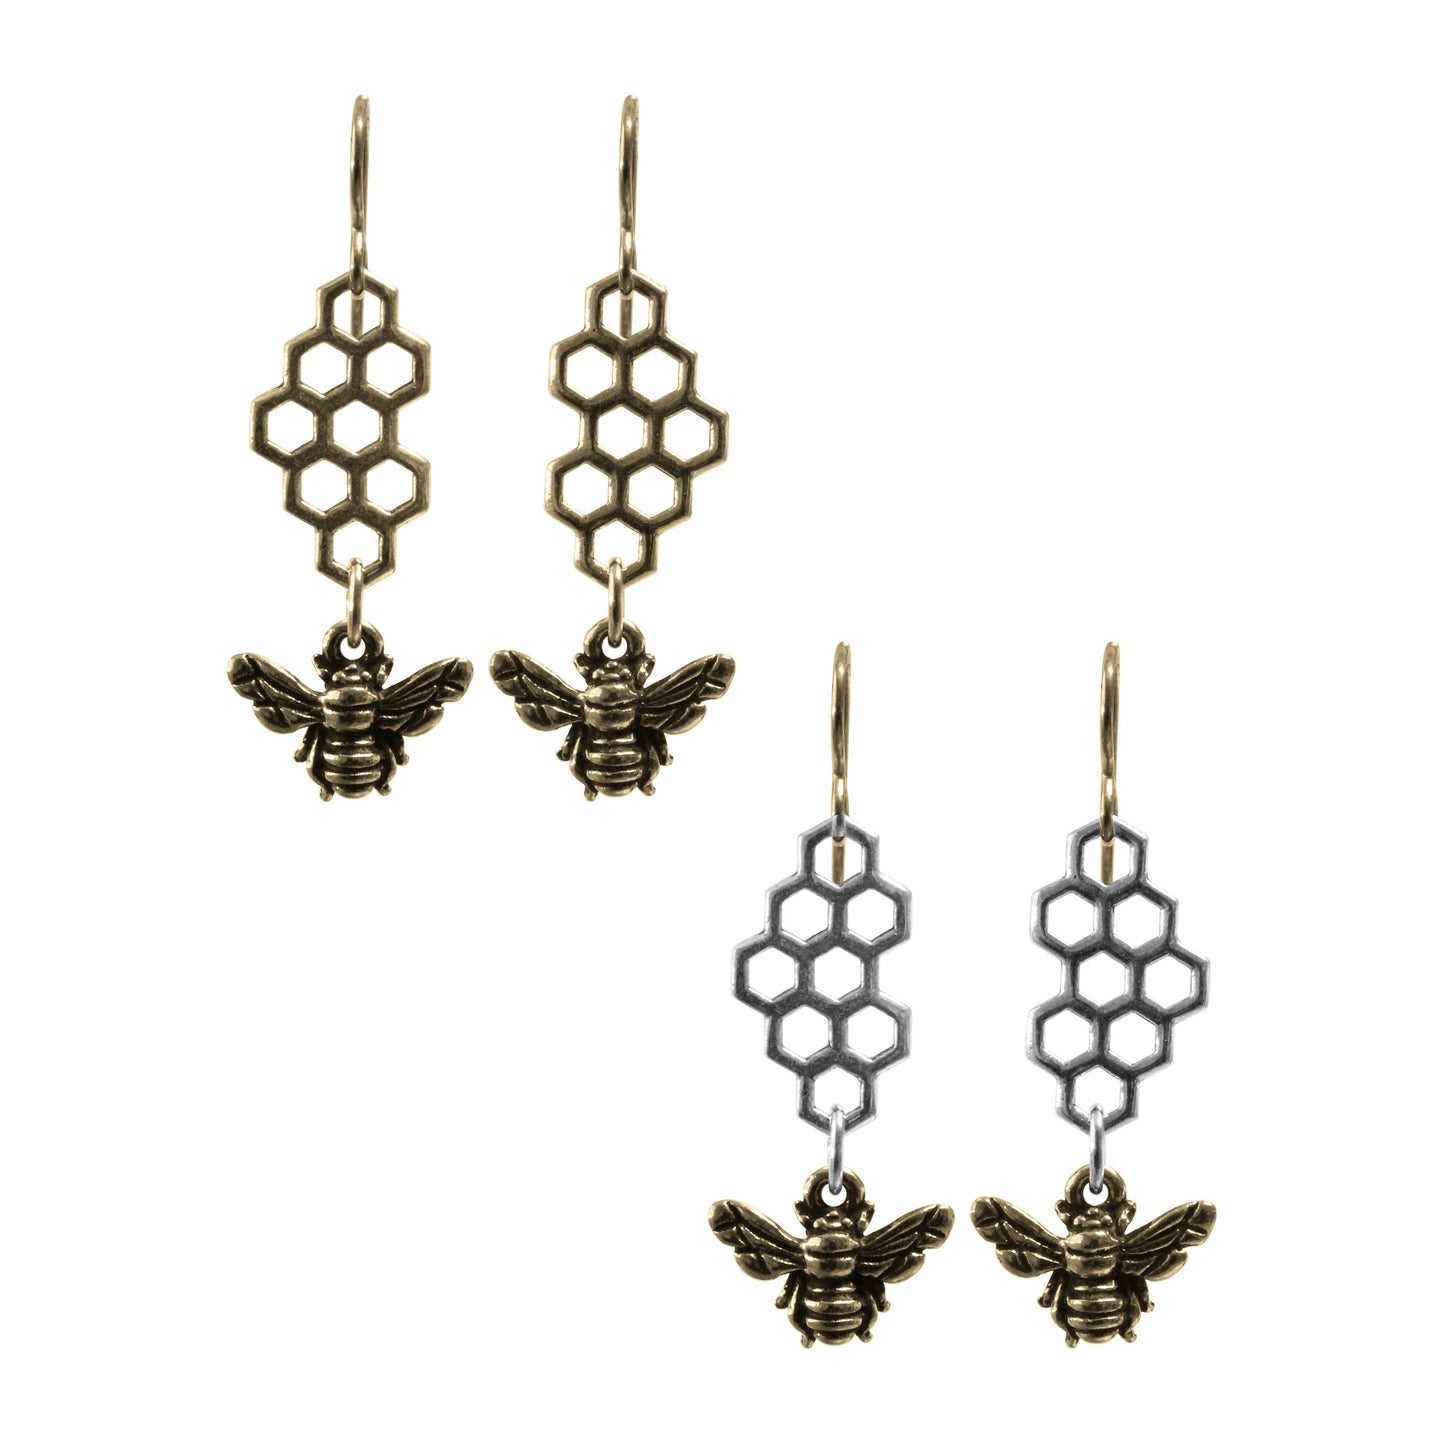 Honeybee Earrings / choose colorway - all gold or gold silver mix